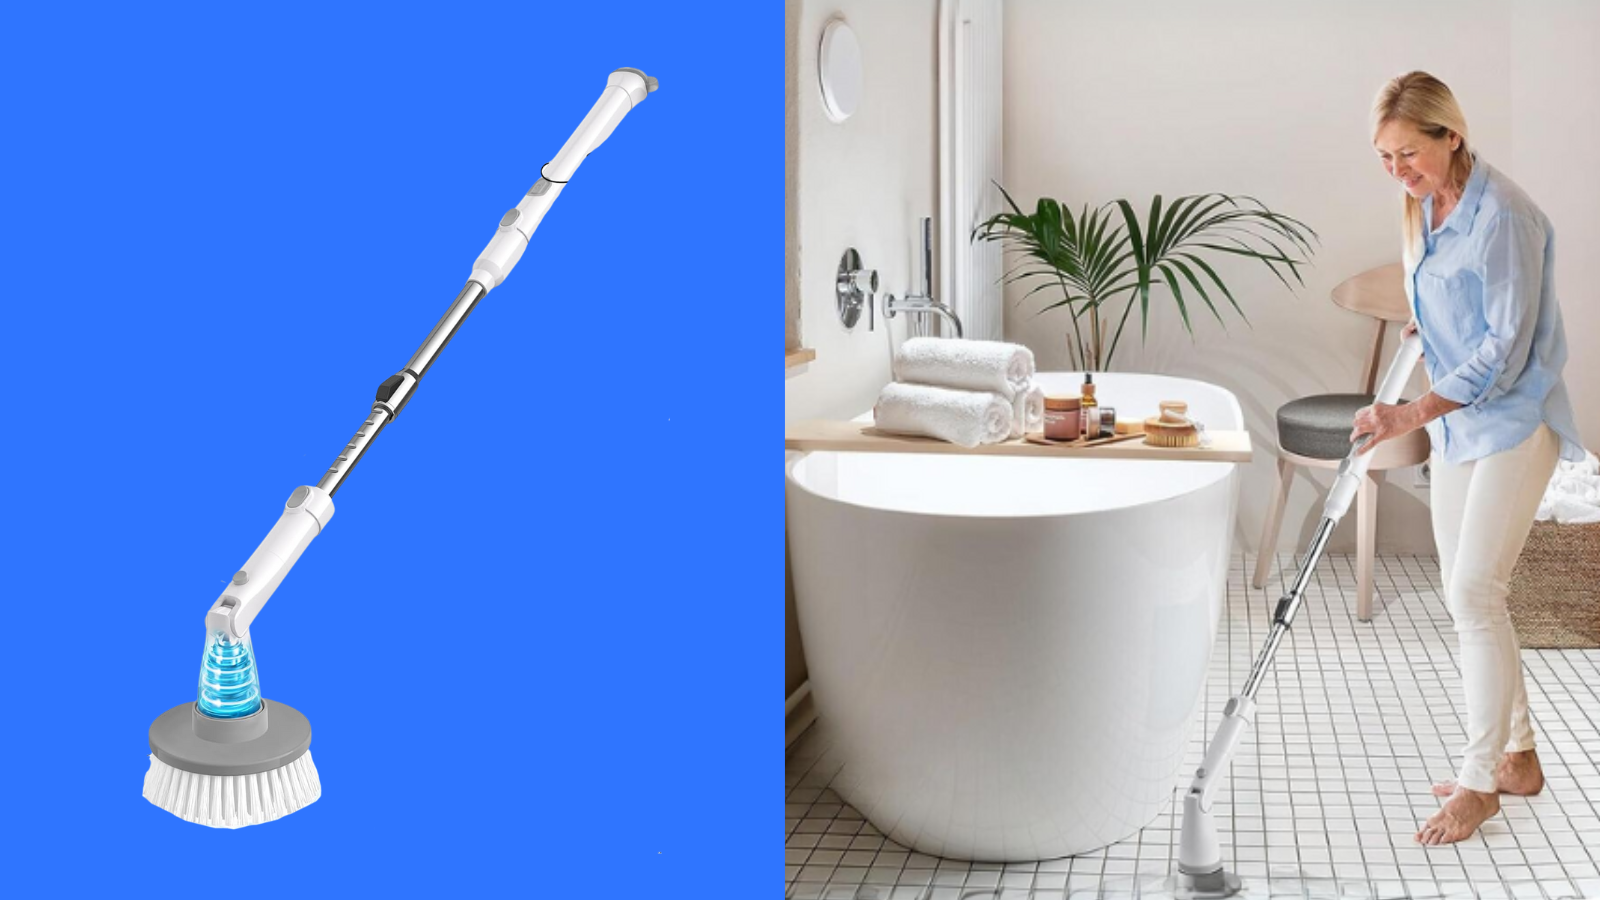 'Grout-cleaning wizard wand': This $36 electric scrub brush requires no elbow grease, and it's nearly 50% off for Memorial Day